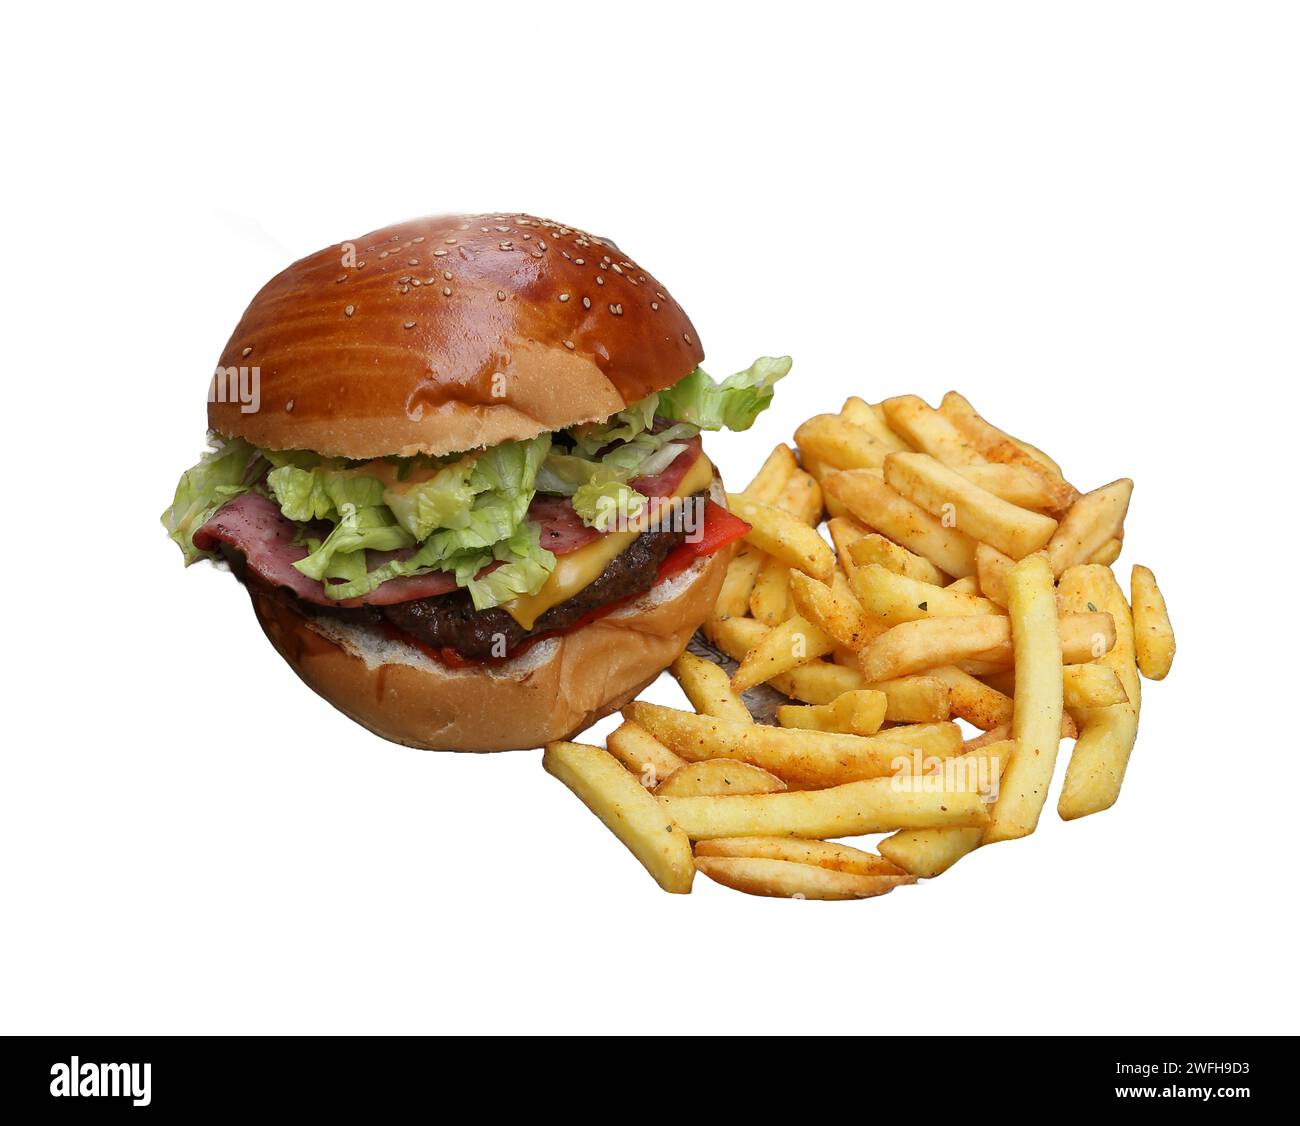 Bacon burger and fries with greens, isolated on white background Stock Photo